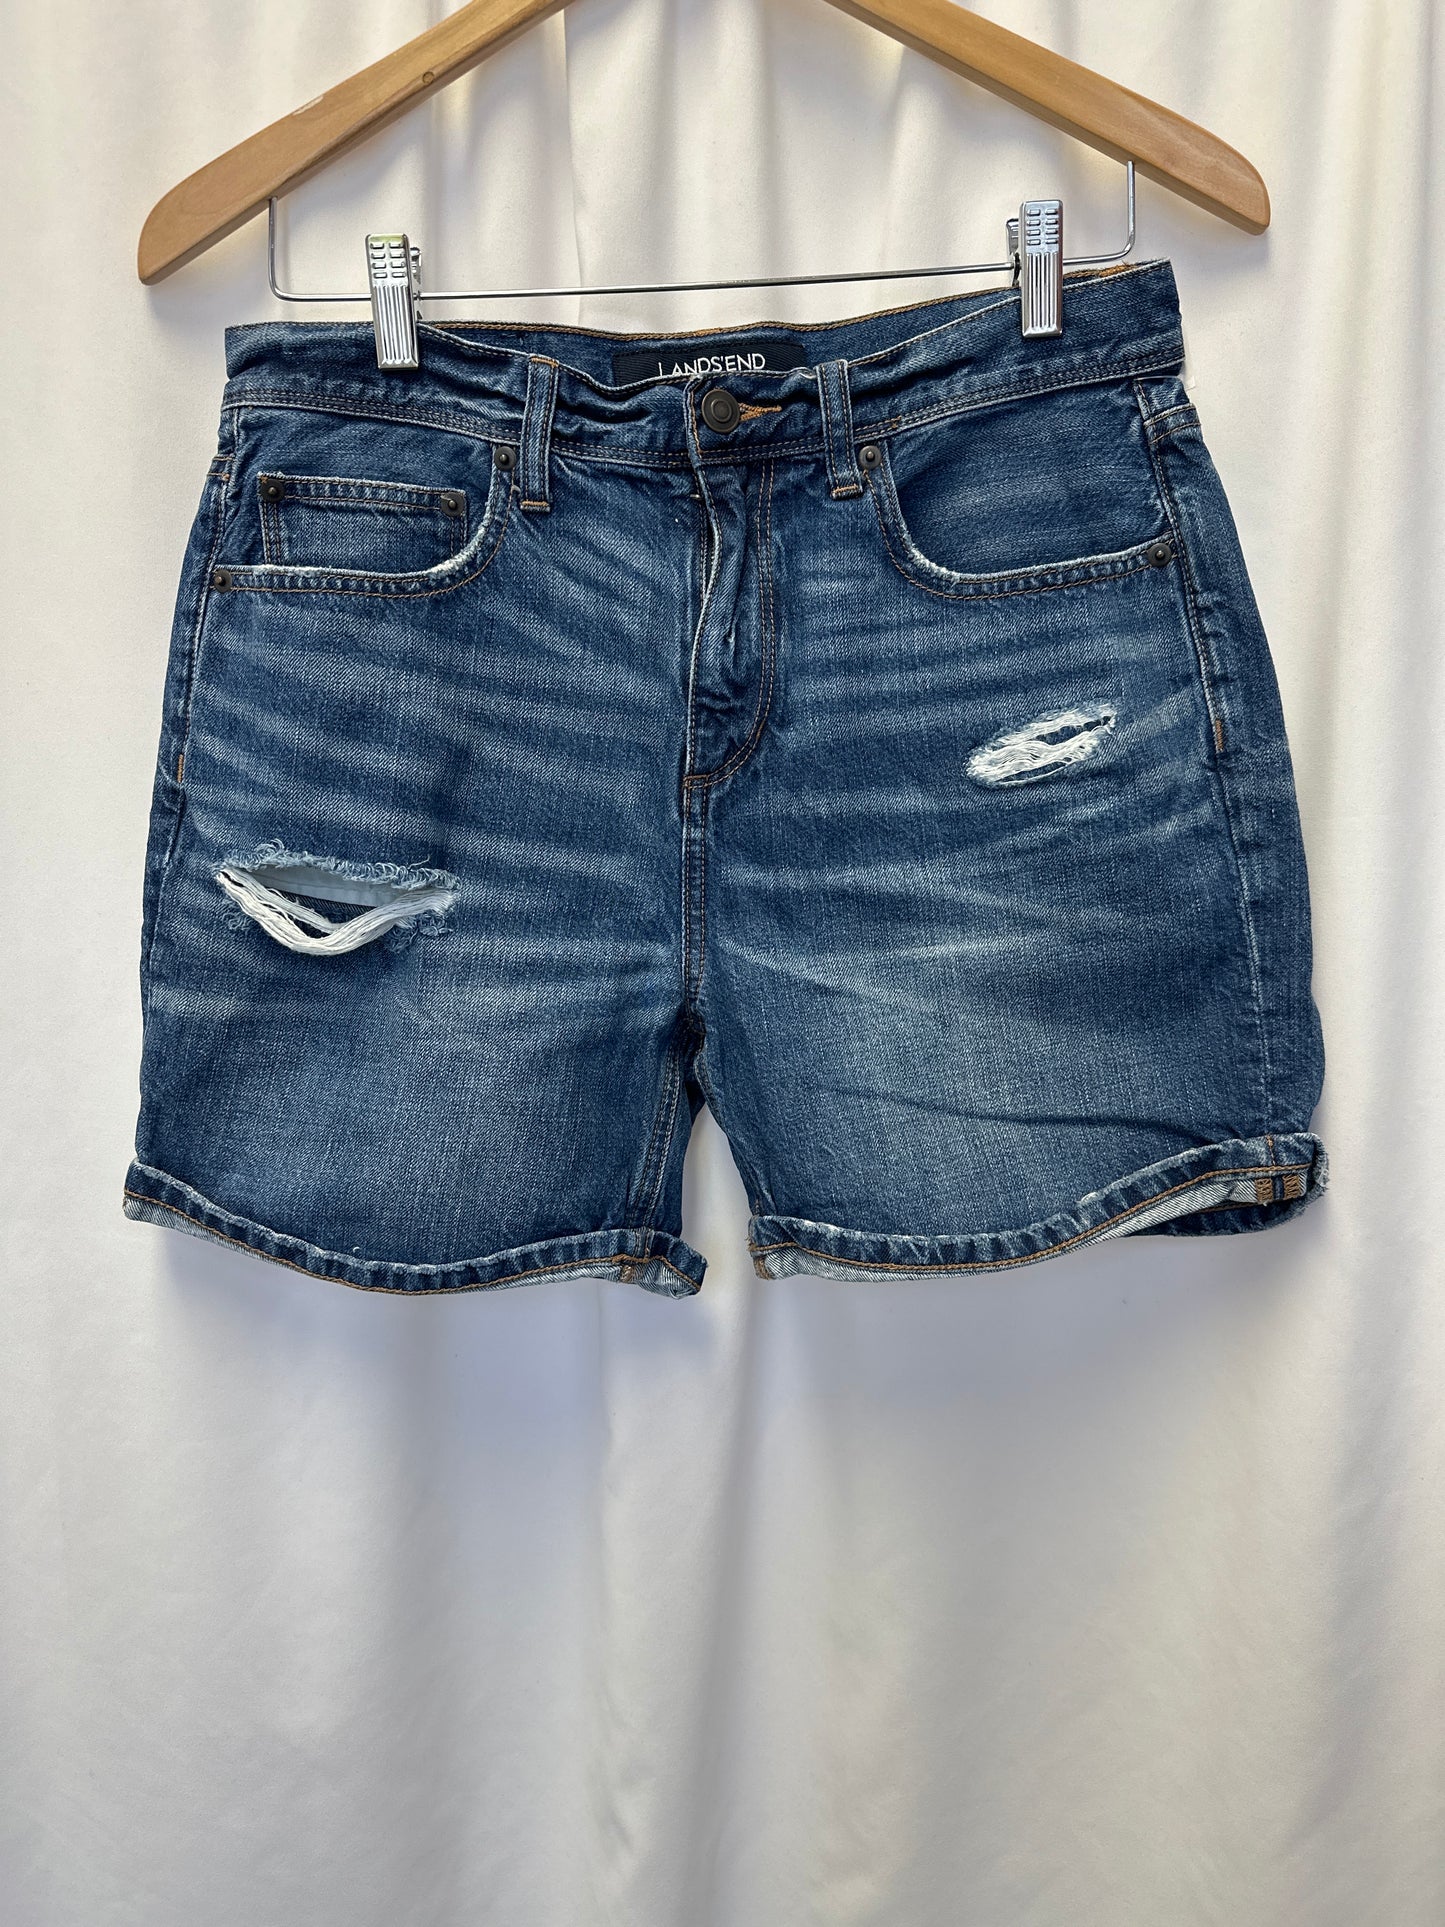 Shorts By Lands End  Size: 8